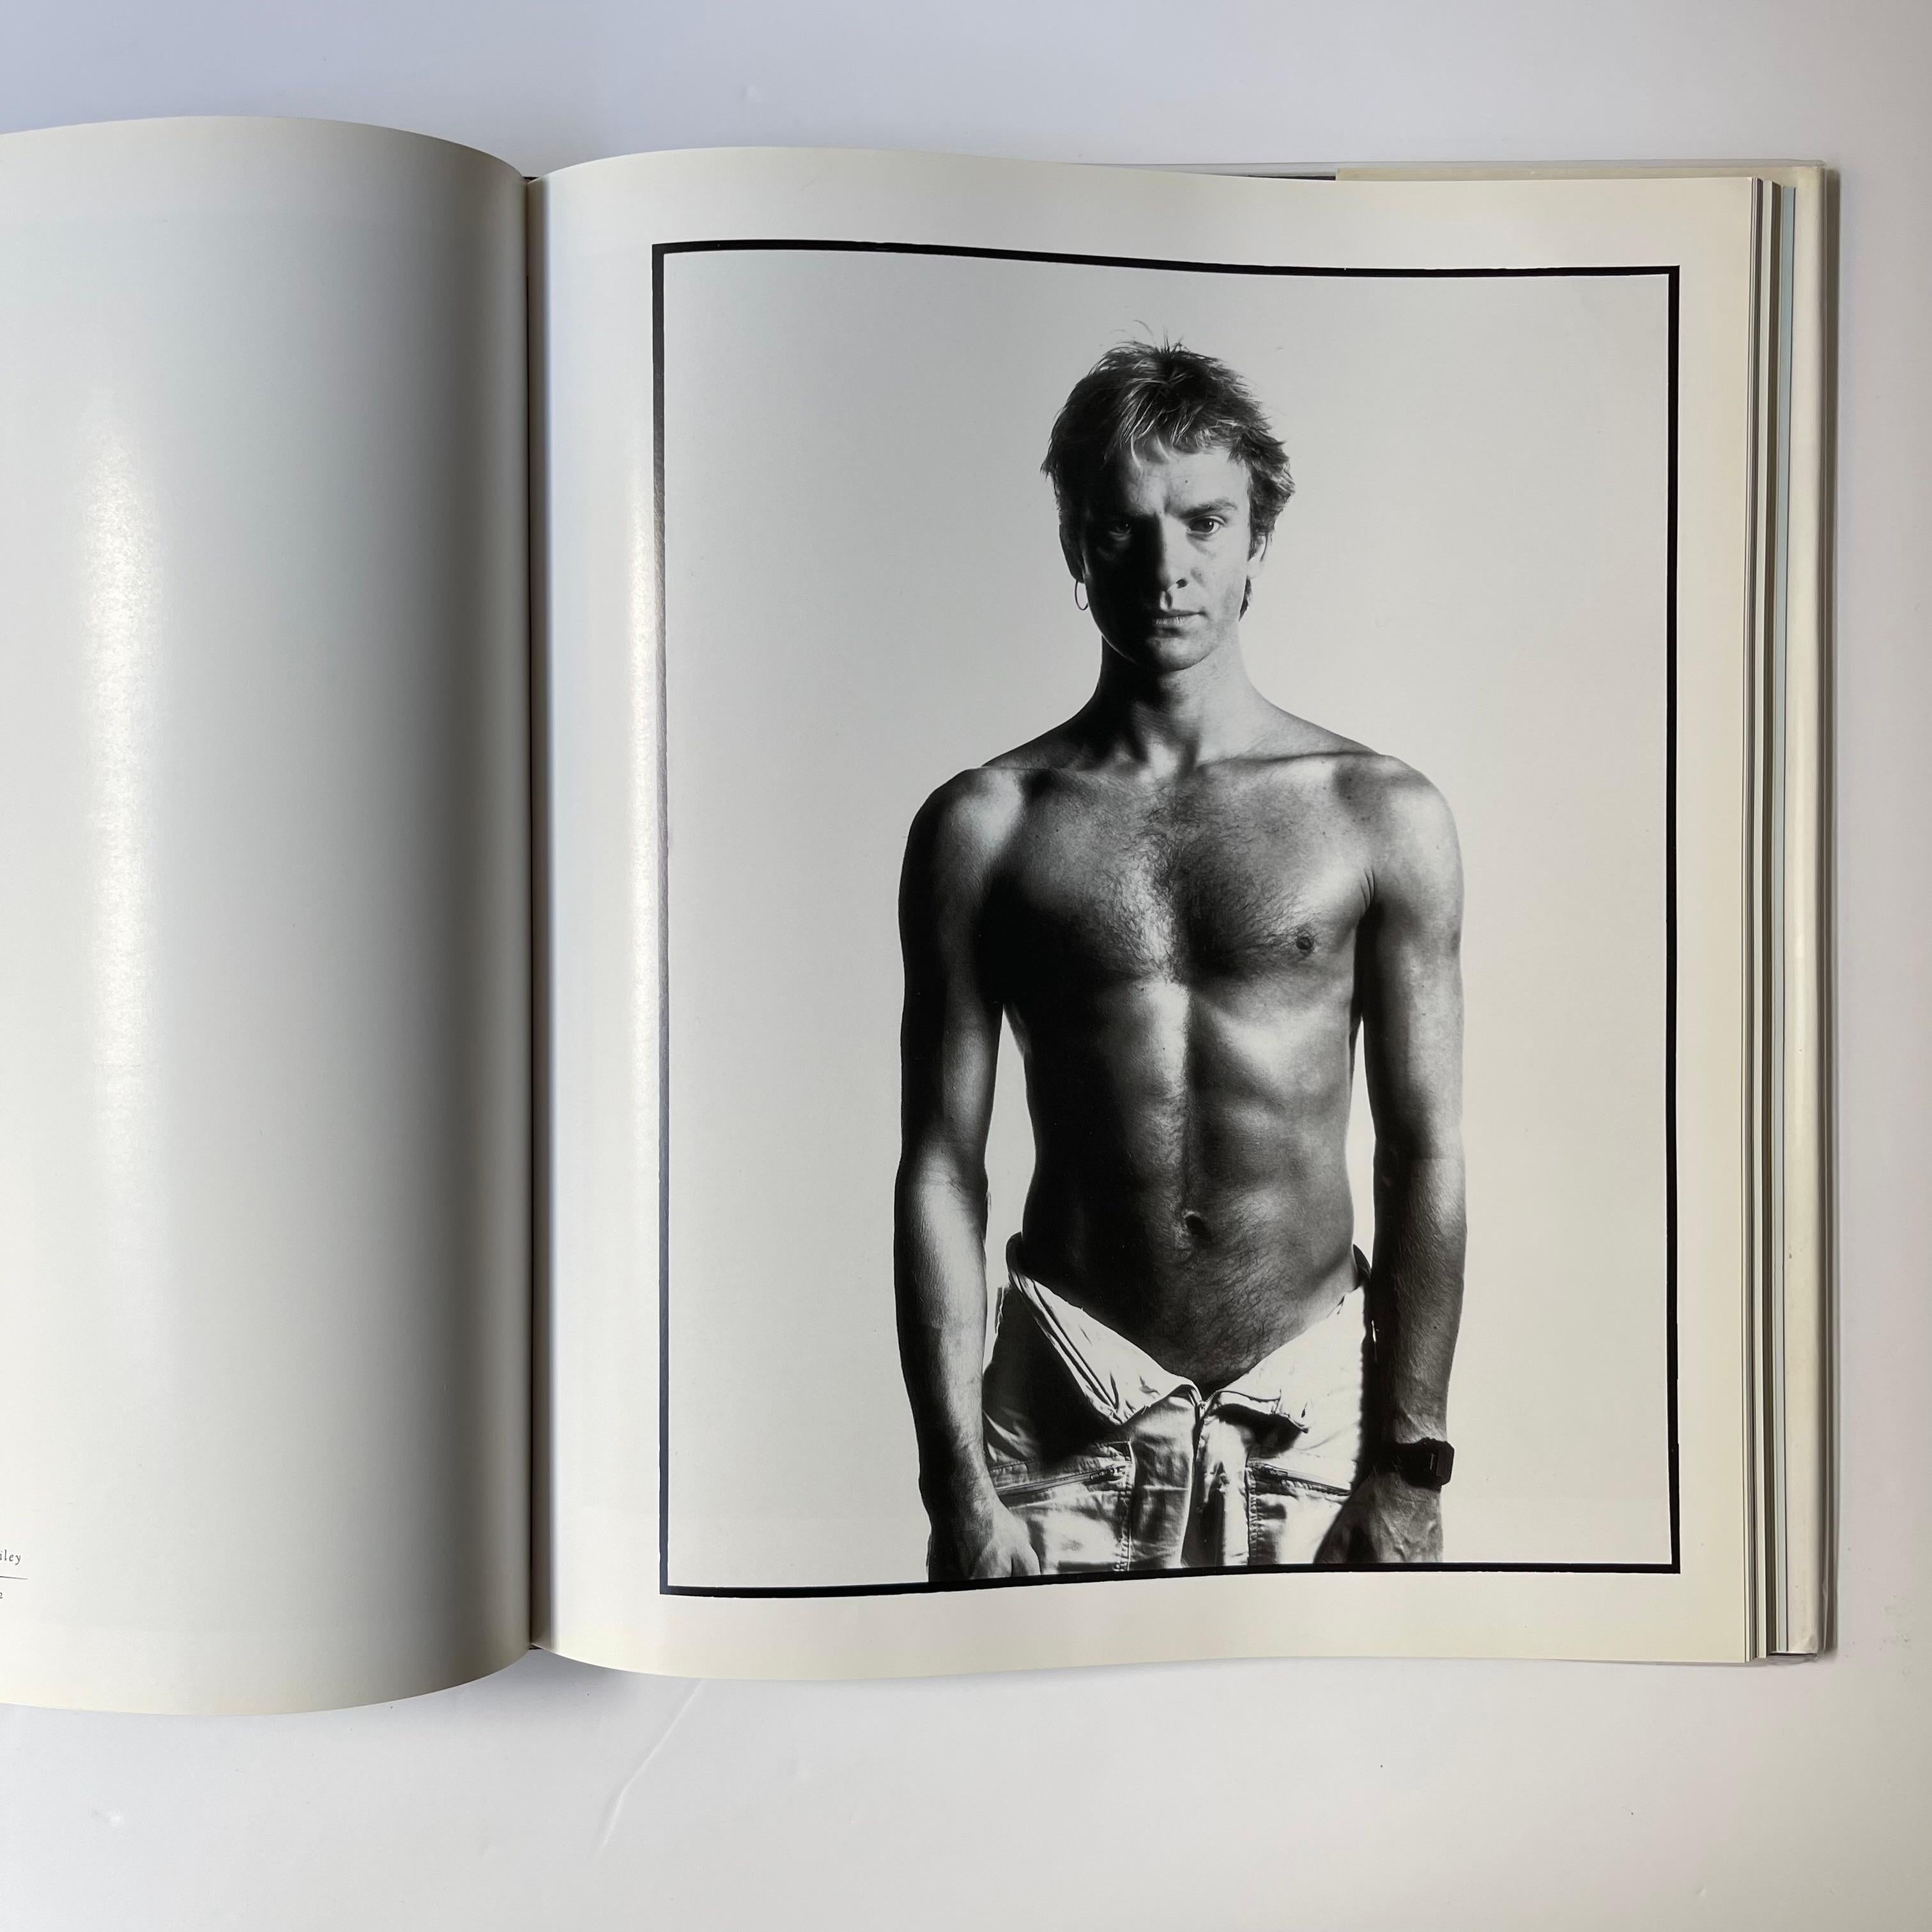 First Edition, published by Simon & Schuster, New York, 1989.

With a predictably brilliant preface by the writer Tom Wolfe, this large format book contains 150 pictures by 35 of the worlds best photographers, all taken for Rolling Stone magazine